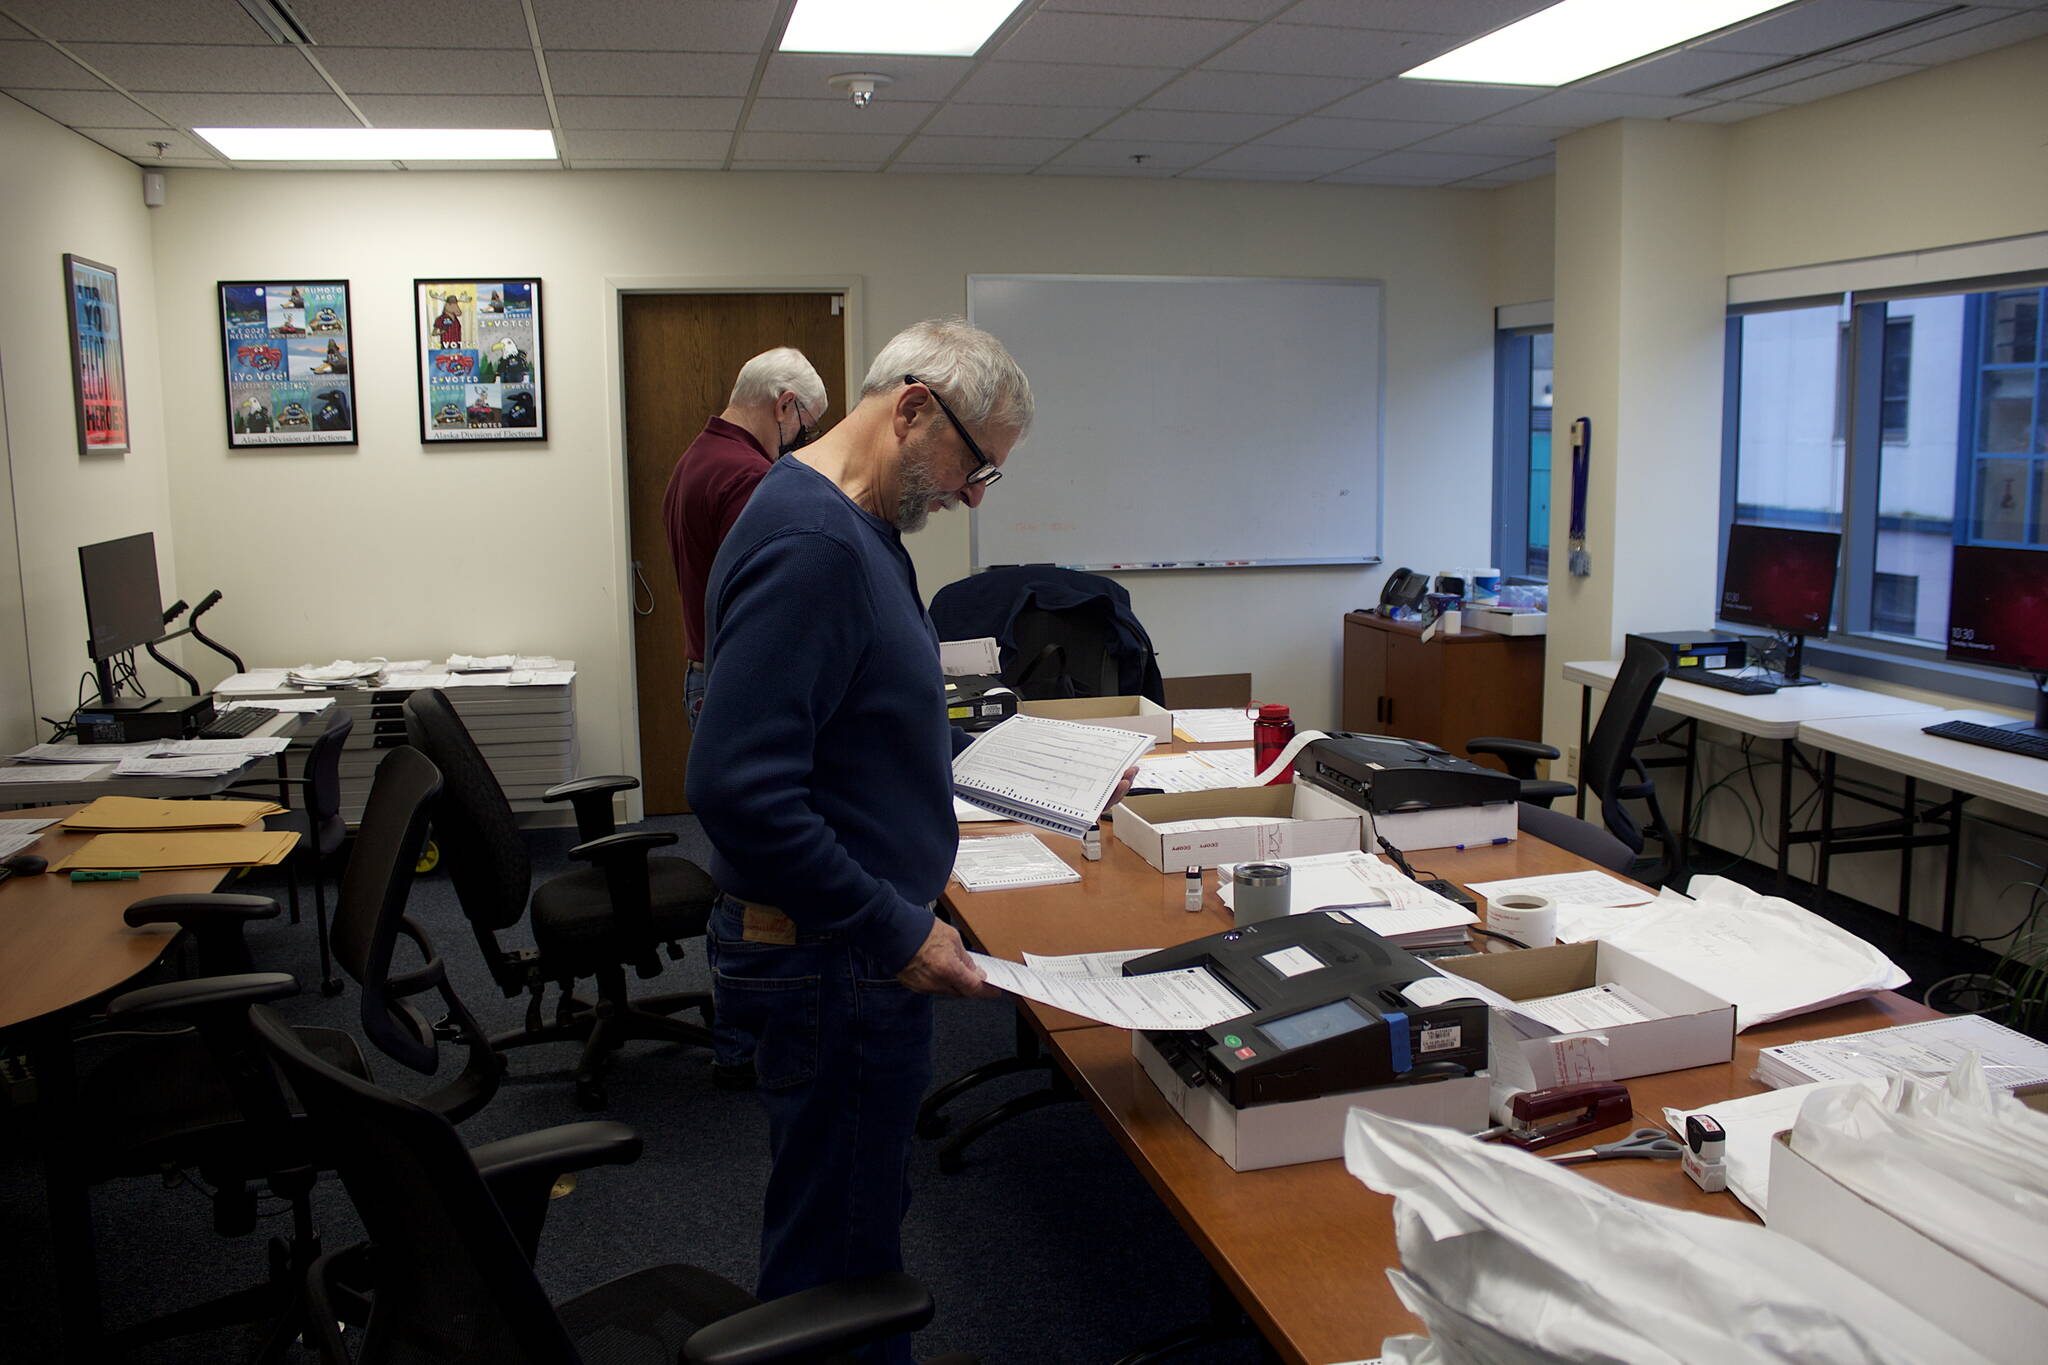 Steve Lewis, foreground, and Stephen Sorensen from the Alaska State Review Board scan ballots from precincts where they were hand counted at the Division of Elections office Tuesday. The hand counts were for first-choice votes only, while the scans will be used for ranked choice tallies for any races where a candidate does not have a first-choice majority. (Mark Sabbatini / Juneau Empire)